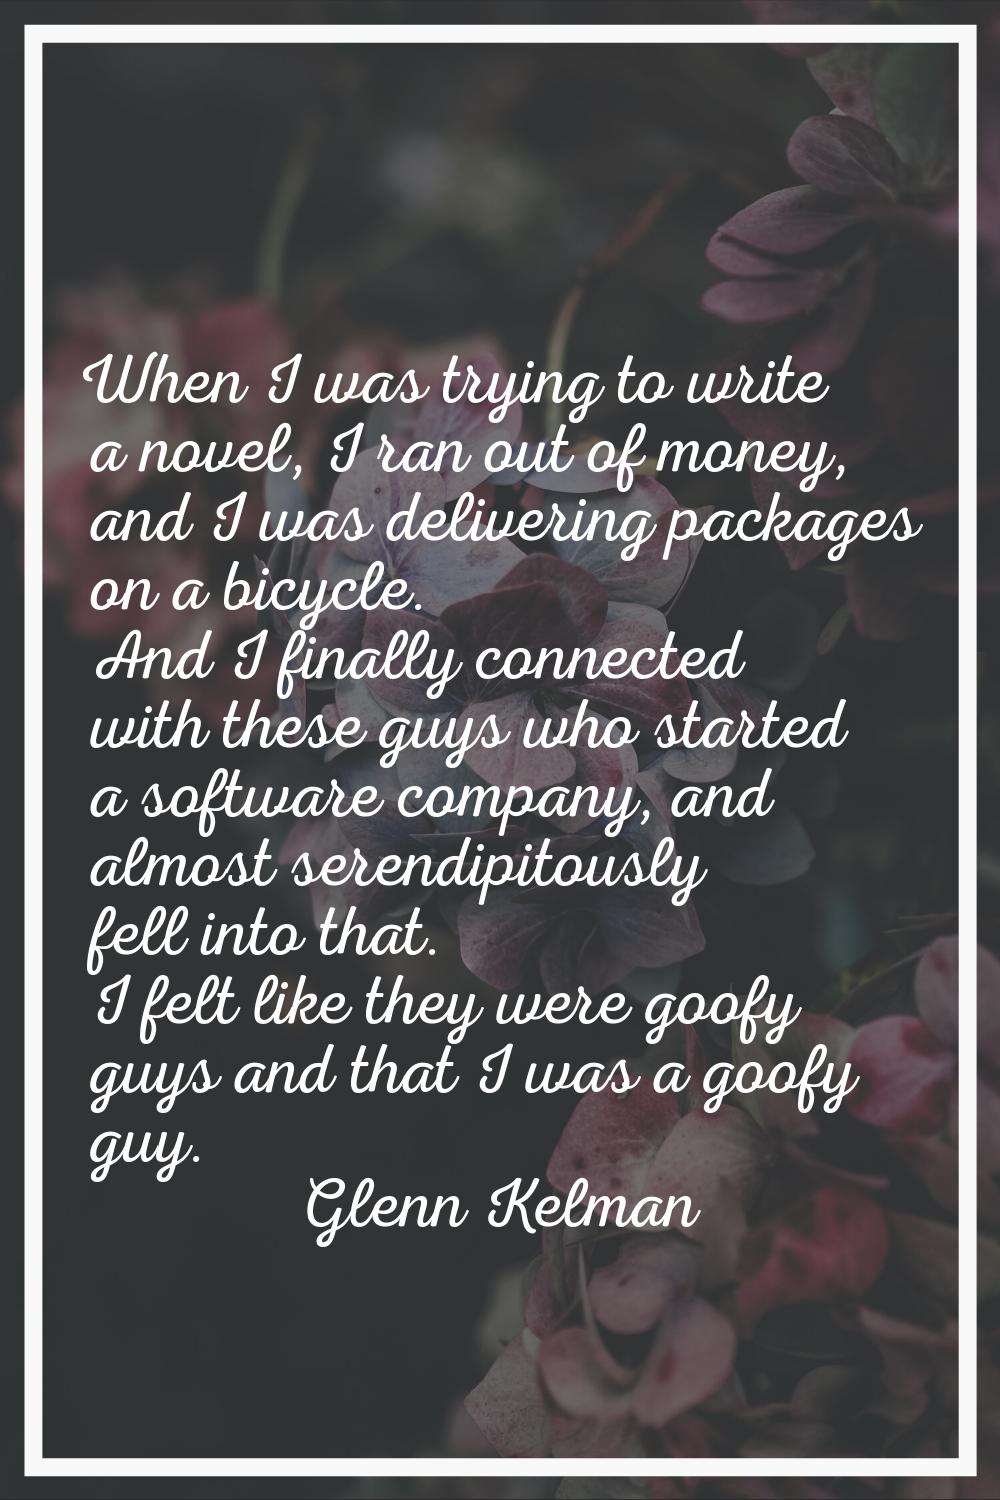 When I was trying to write a novel, I ran out of money, and I was delivering packages on a bicycle.